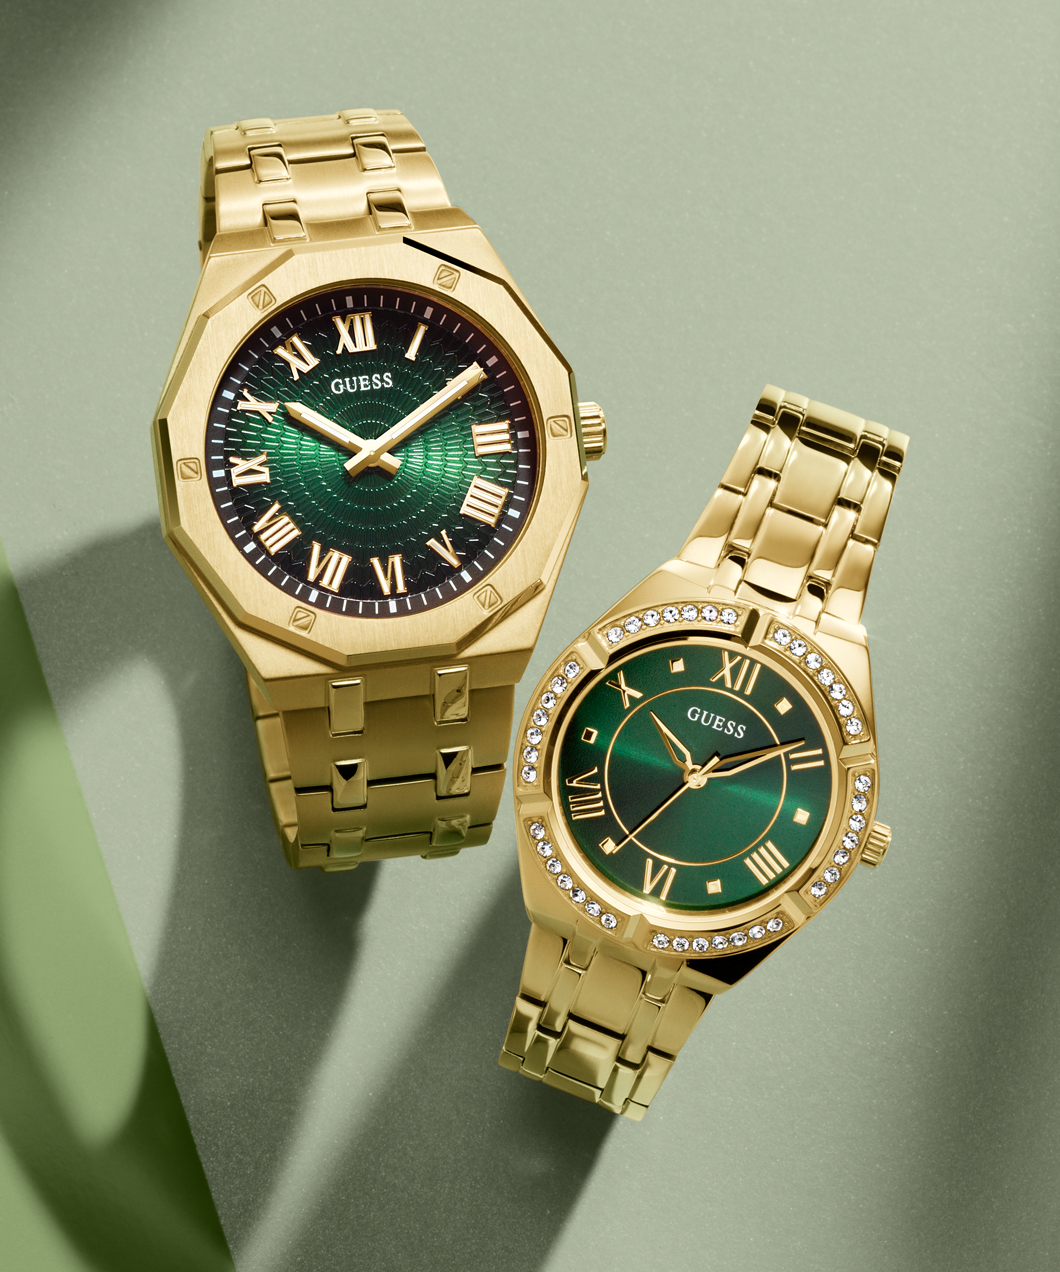 GUESS Watches His & Hers Spring Watch Collection